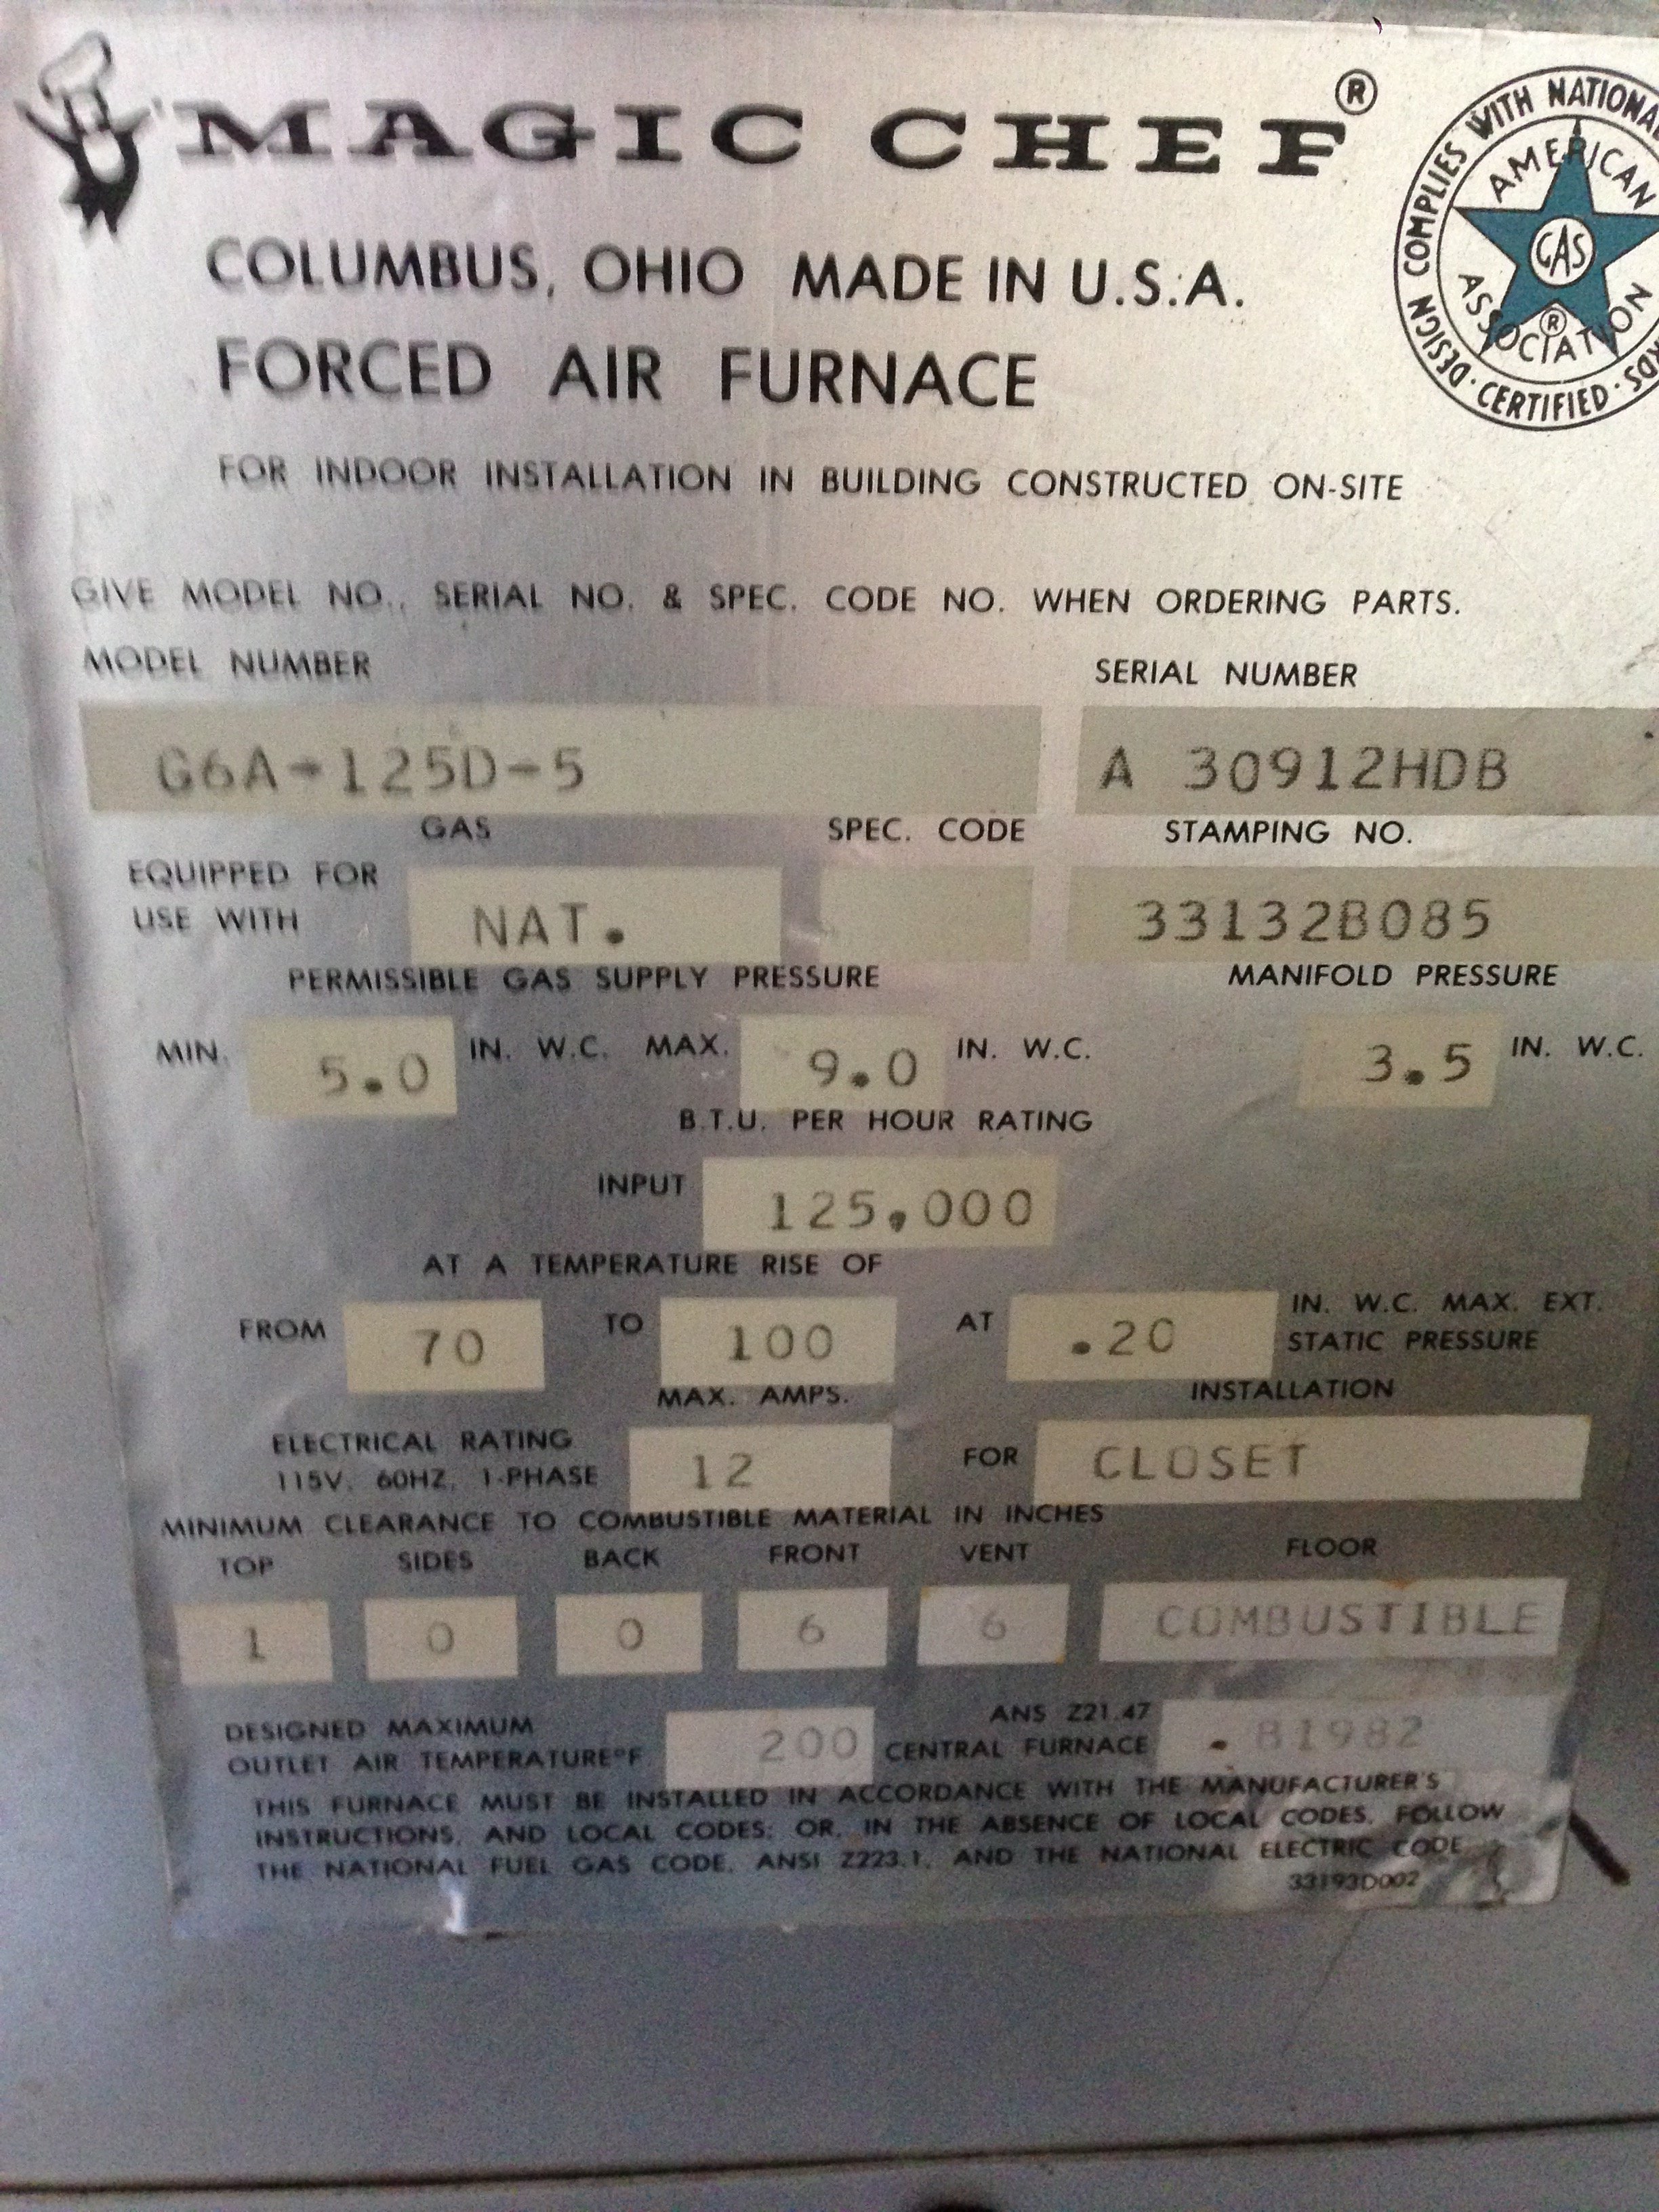 honeywell gas thermostat instructions